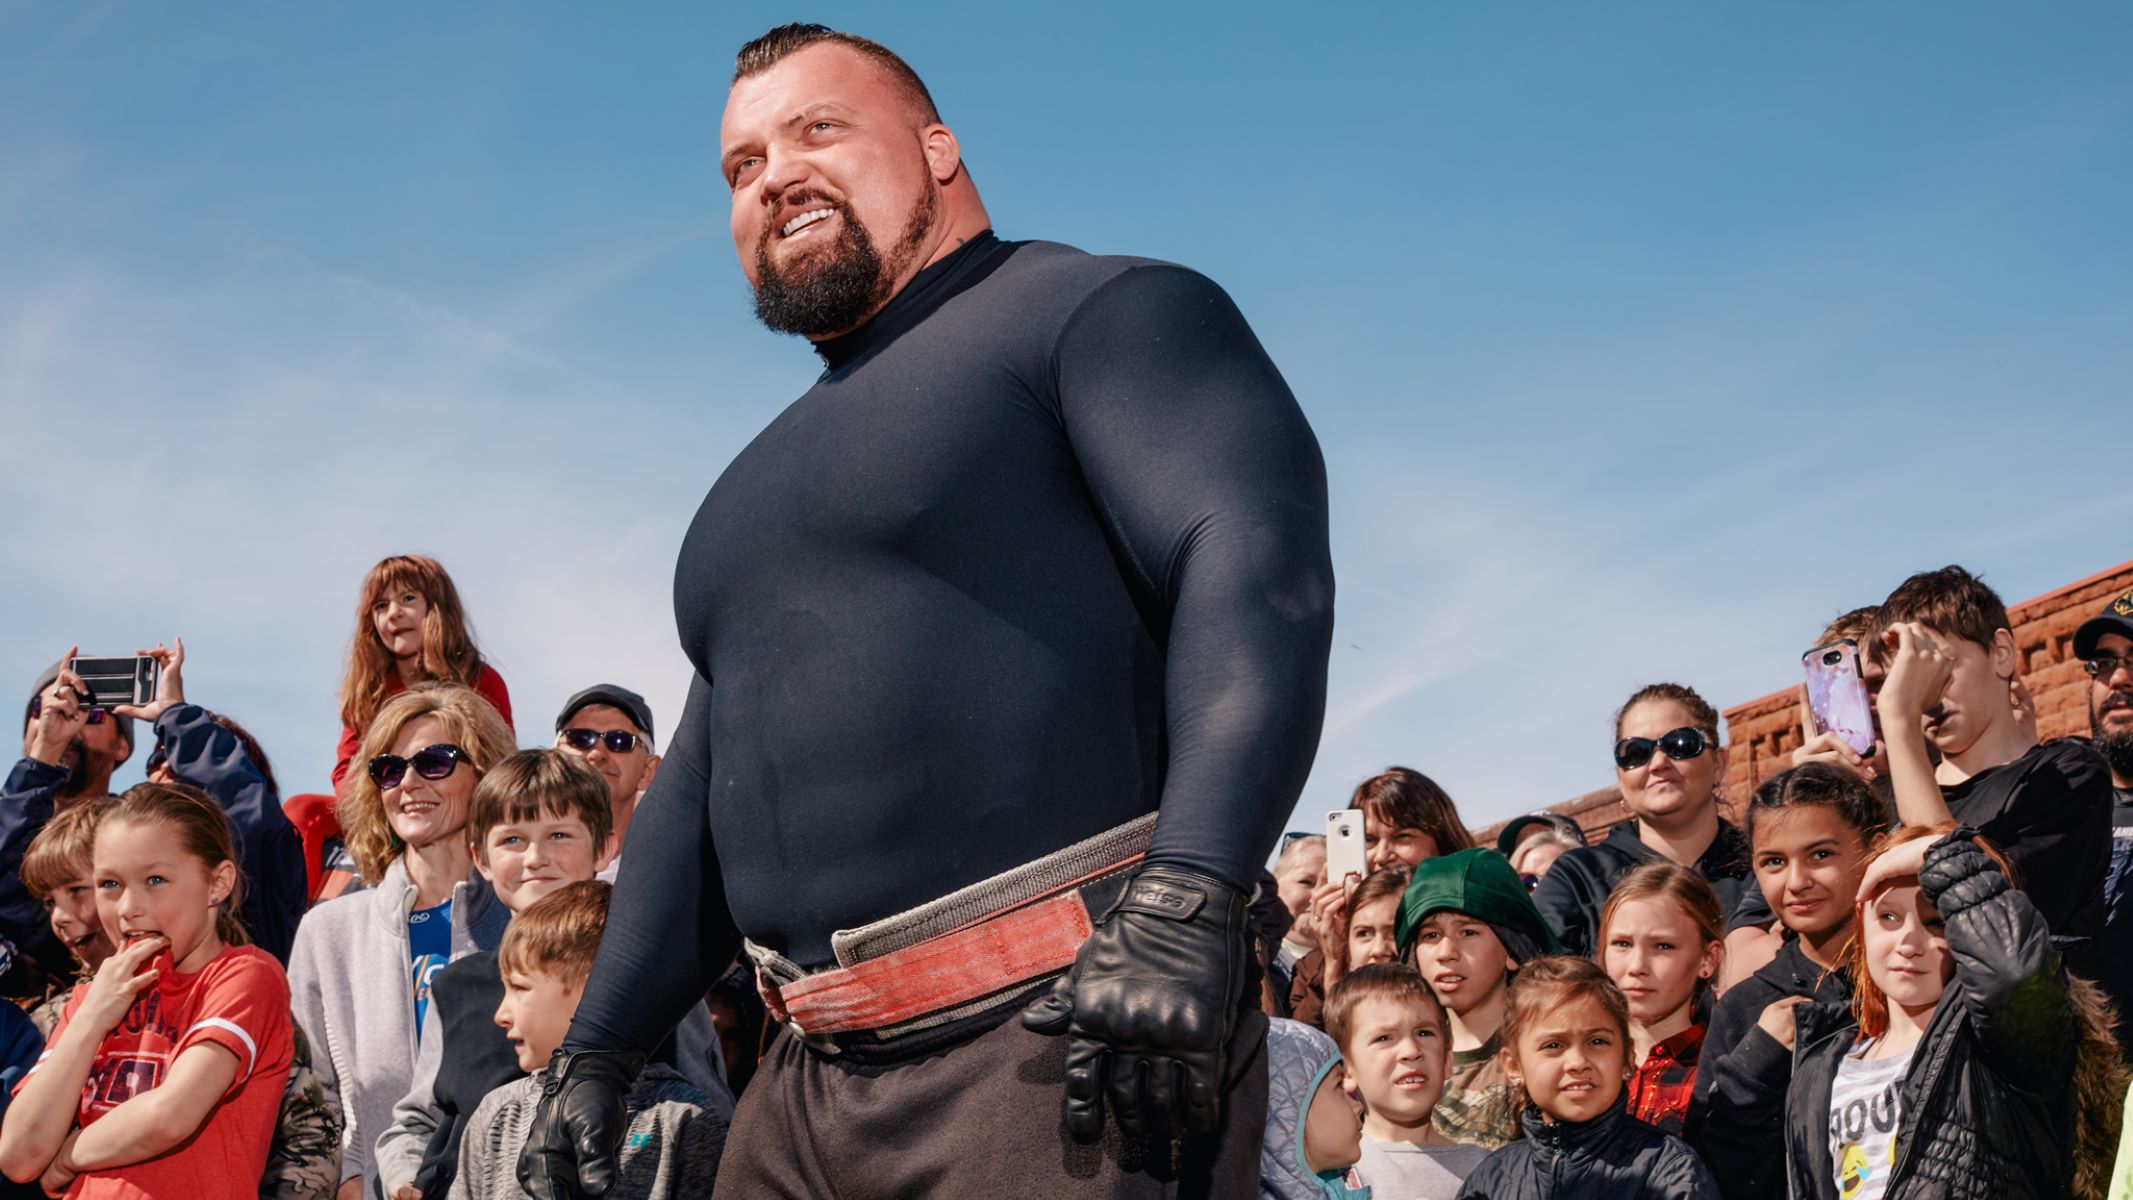 Eddie Hall’s Shocking Secret Revealed: The Truth About Steroids